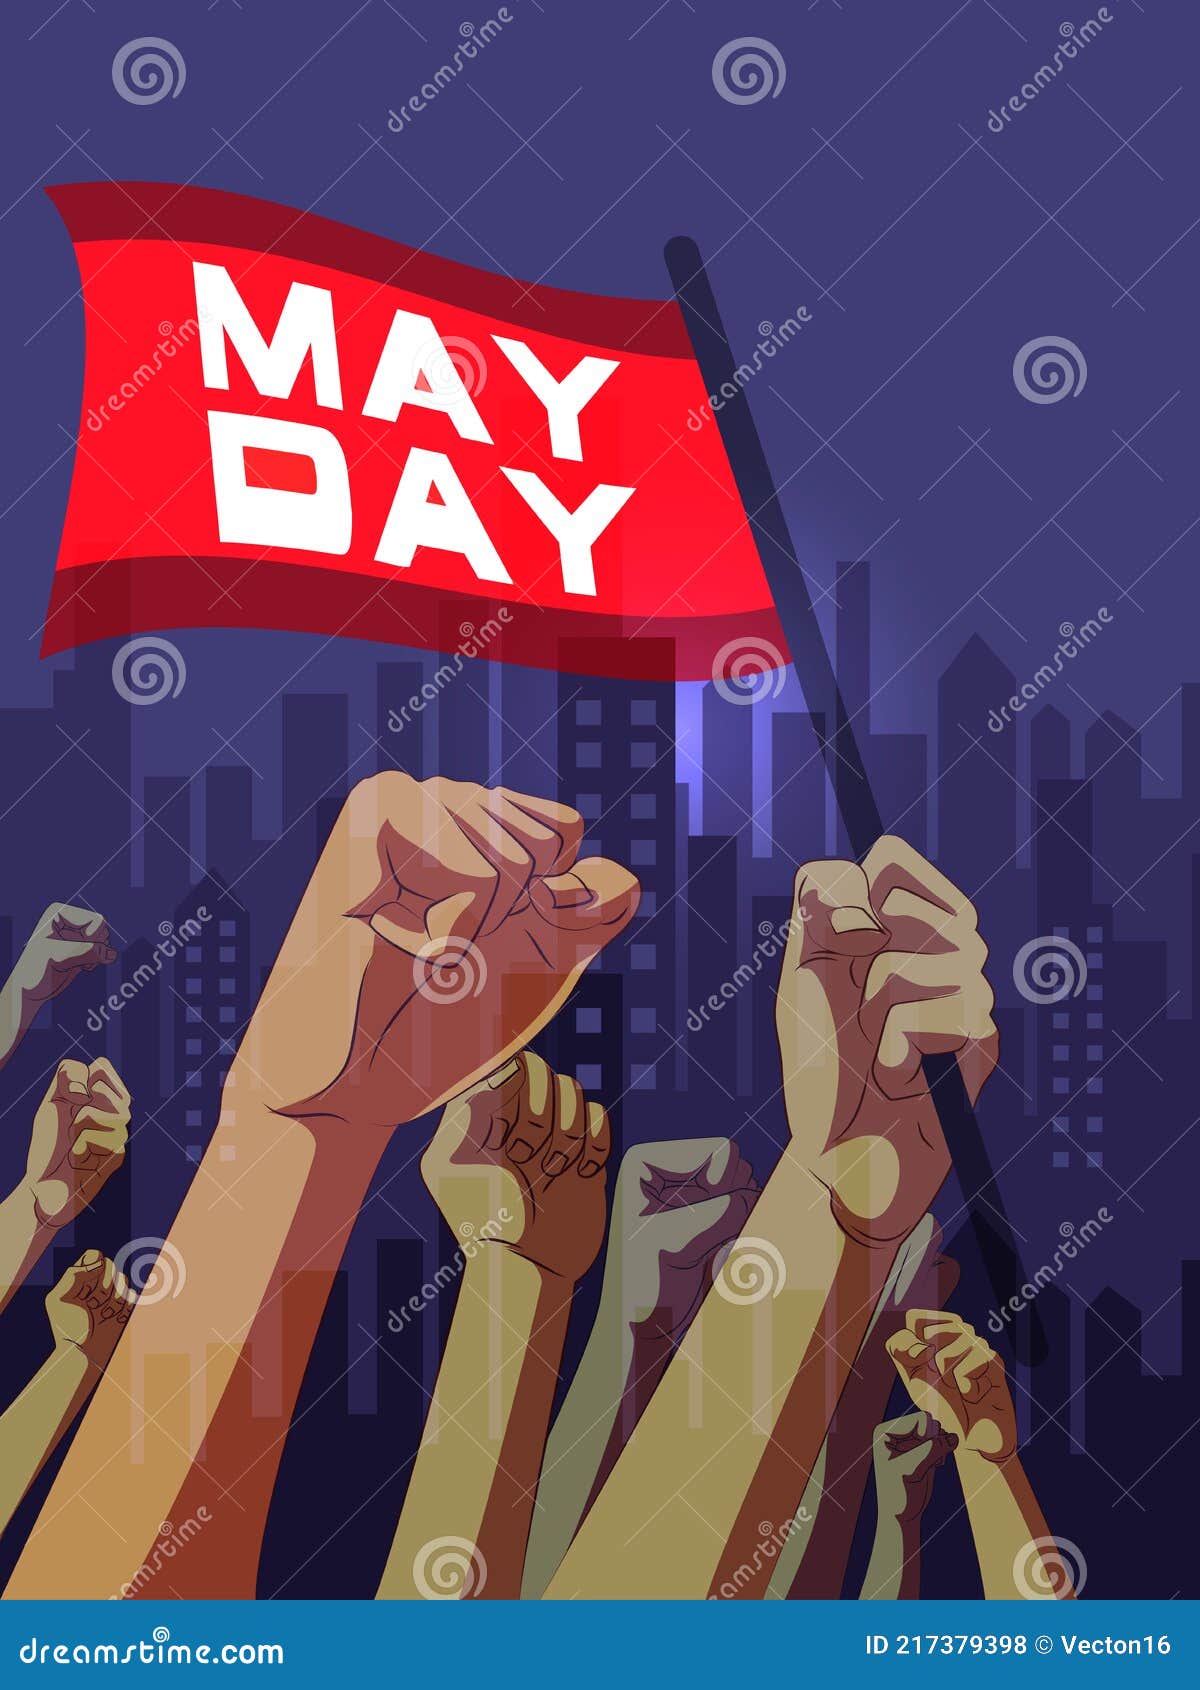 Happy May Day Knows As Internation Worker S Day or Labour Day Stock